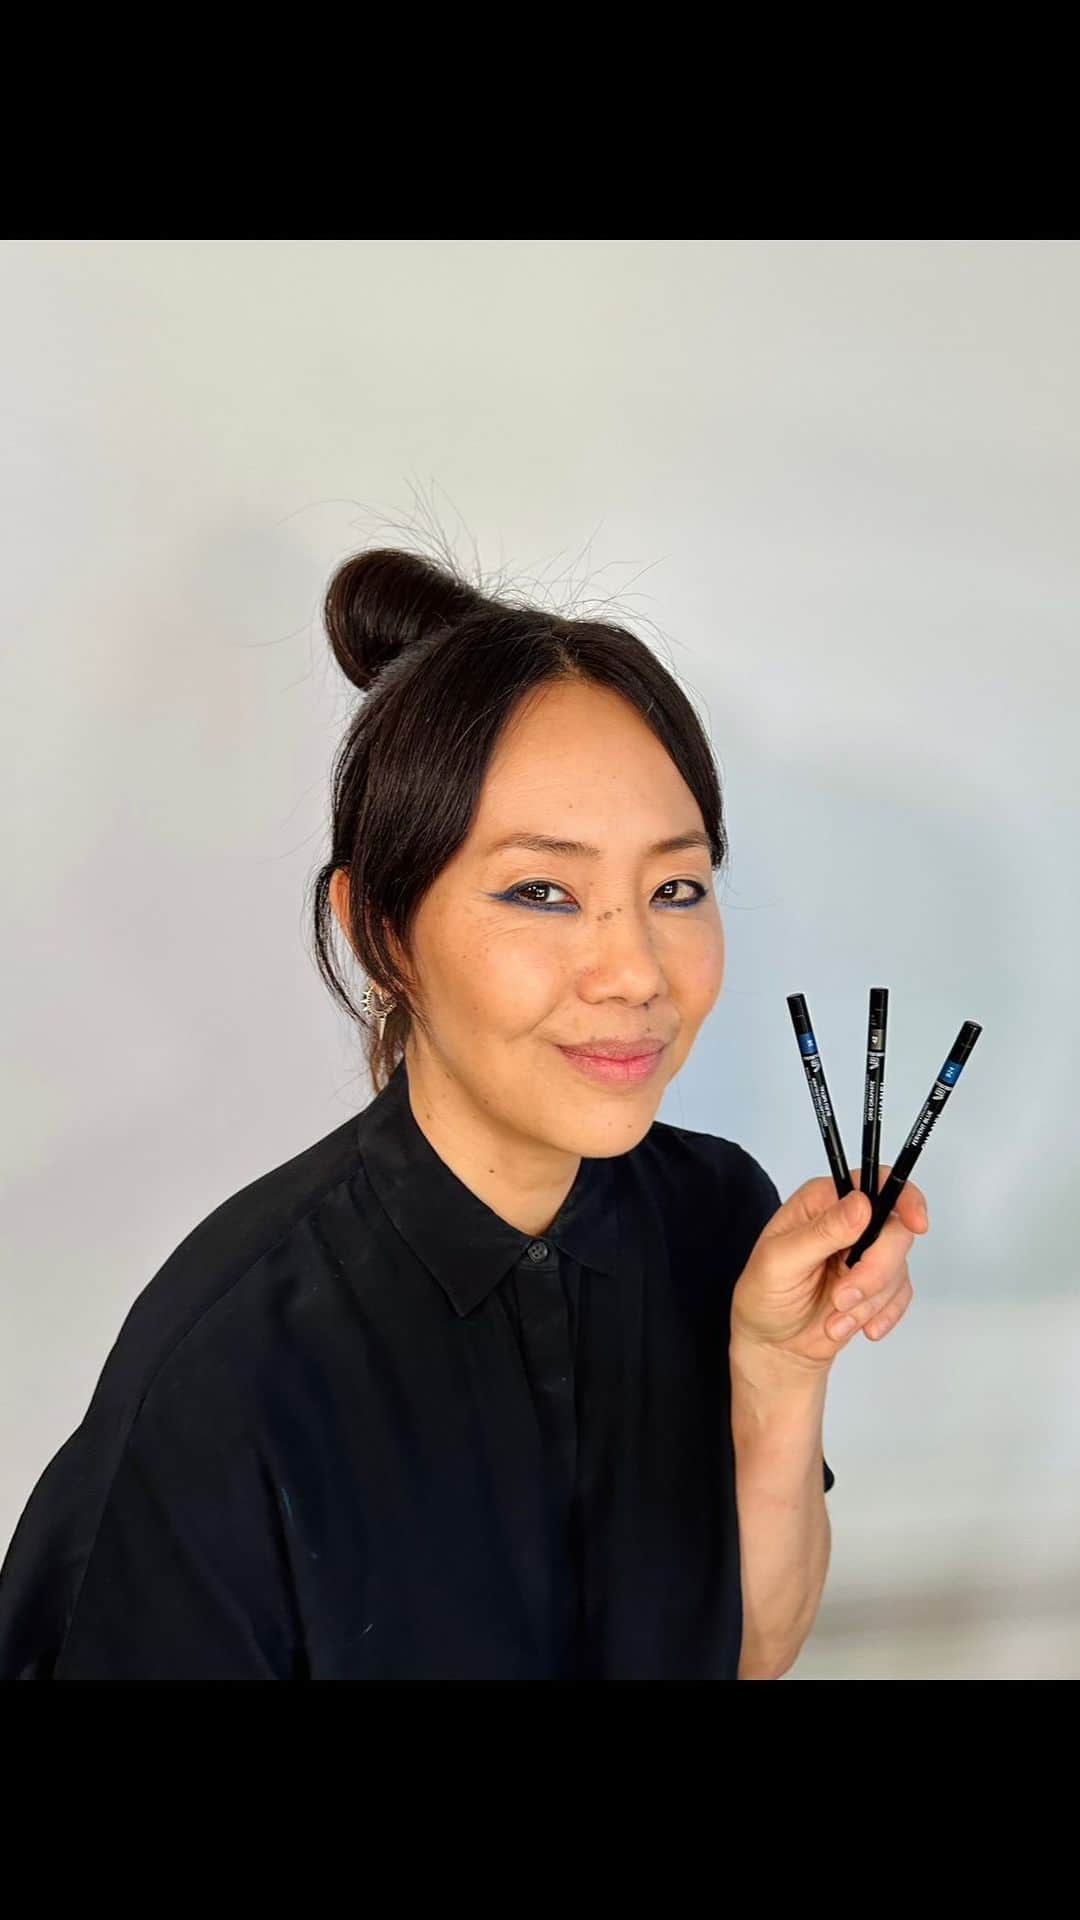 Kara Yoshimoto Buaのインスタグラム：「Punky Blue Reverse Cat Eye with CHANEL💙 @welovecoco #welovecoco @chanel.beauty   Products CHANEL  Stylo Yeux Waterproof Eyeliners in Bleu Métal, Marine, and Gris Graphite  • • •  The Biggest, Brightest Blue Supermoon  of the year is WEDNESDAY August 30 in Pisces at 6:35PM Pacific Time  To celebrate this magical moon and acknowledge the retrograde season, I gave myself a Punky Blue Reverse Cat Eye  The Super Blue Moon, the most luminous celestial event of the year, emerges a surge of energy poised to cleanse the slate. Embracing the release of what no longer serves creates space for beauty to flourish. In the unfolding weeks and months, expect profound insights and personal growth. Patience shapes decisions positively. The dance of seven retrograde planets might rekindle the past, impacting communication.   Cultivate practices to clear, align,  and stabilize your Bio-Magnetic Field, absorb more Light Photons and awaken your intuition to empower the manifestation of your not-so-hidden-anymore supernatural abilities. The full moon in Pisces represents deep healing and transformation, aligning with our evolving quantum reality. Releasing the past sets the stage for positive change, an Alchemical Beauty born from the convergence of the supermoon’s energy and the intricate retrograde dance is a rare opportunity to finally make our dreams a reality.  In the presence of a full moon, one might consider the subtle influx of photonic particles gracing us. Exercise, it is said, invites energy into our being, flowing through our meridians. During a Super Blue Full Moon, a  chance emerges to nurture and expand our Aura,  our Bio-magnetic Field blooms 🌙  #makeupartist #chanelmakeup #chanelmakeupartist #chanelbeauty #simplemakeupbykara #makeupbykara #alchemicalbeautybykara #alchemicalbeauty #makeupbykarayoshimotobua #reels #bluemoon #reelsvideo #reelsinstagram」